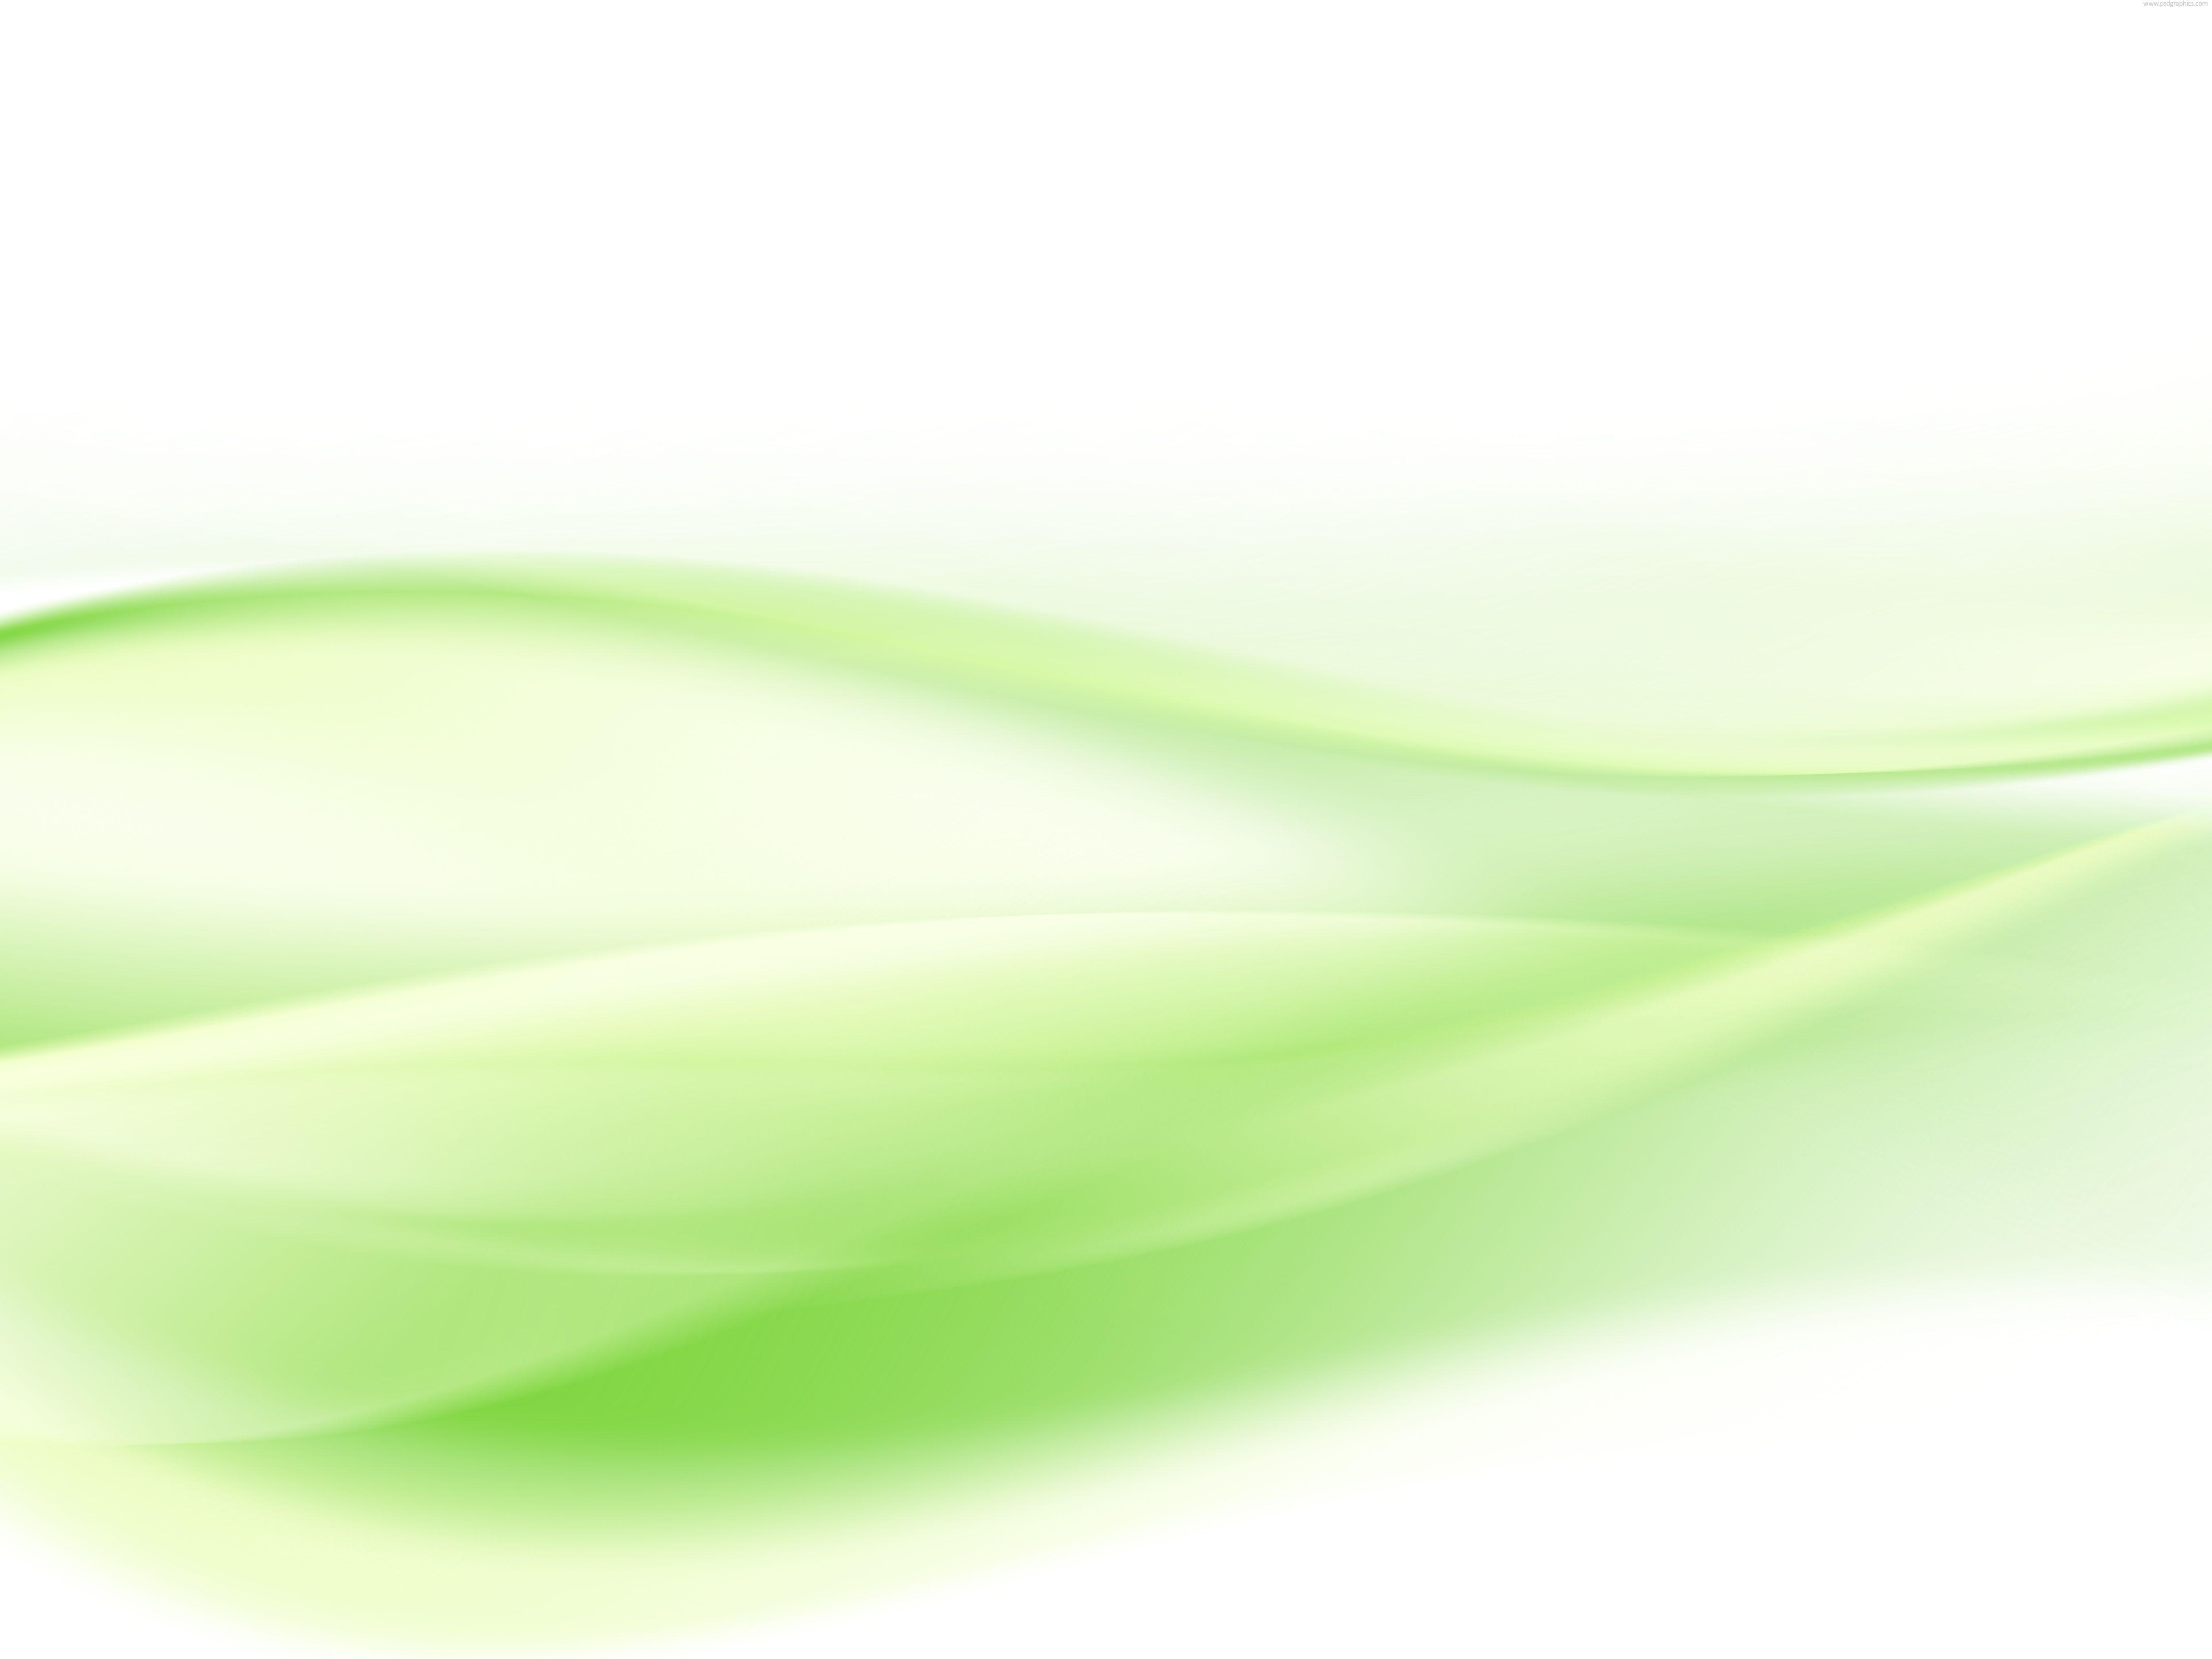 Free green backgrounds design image Download